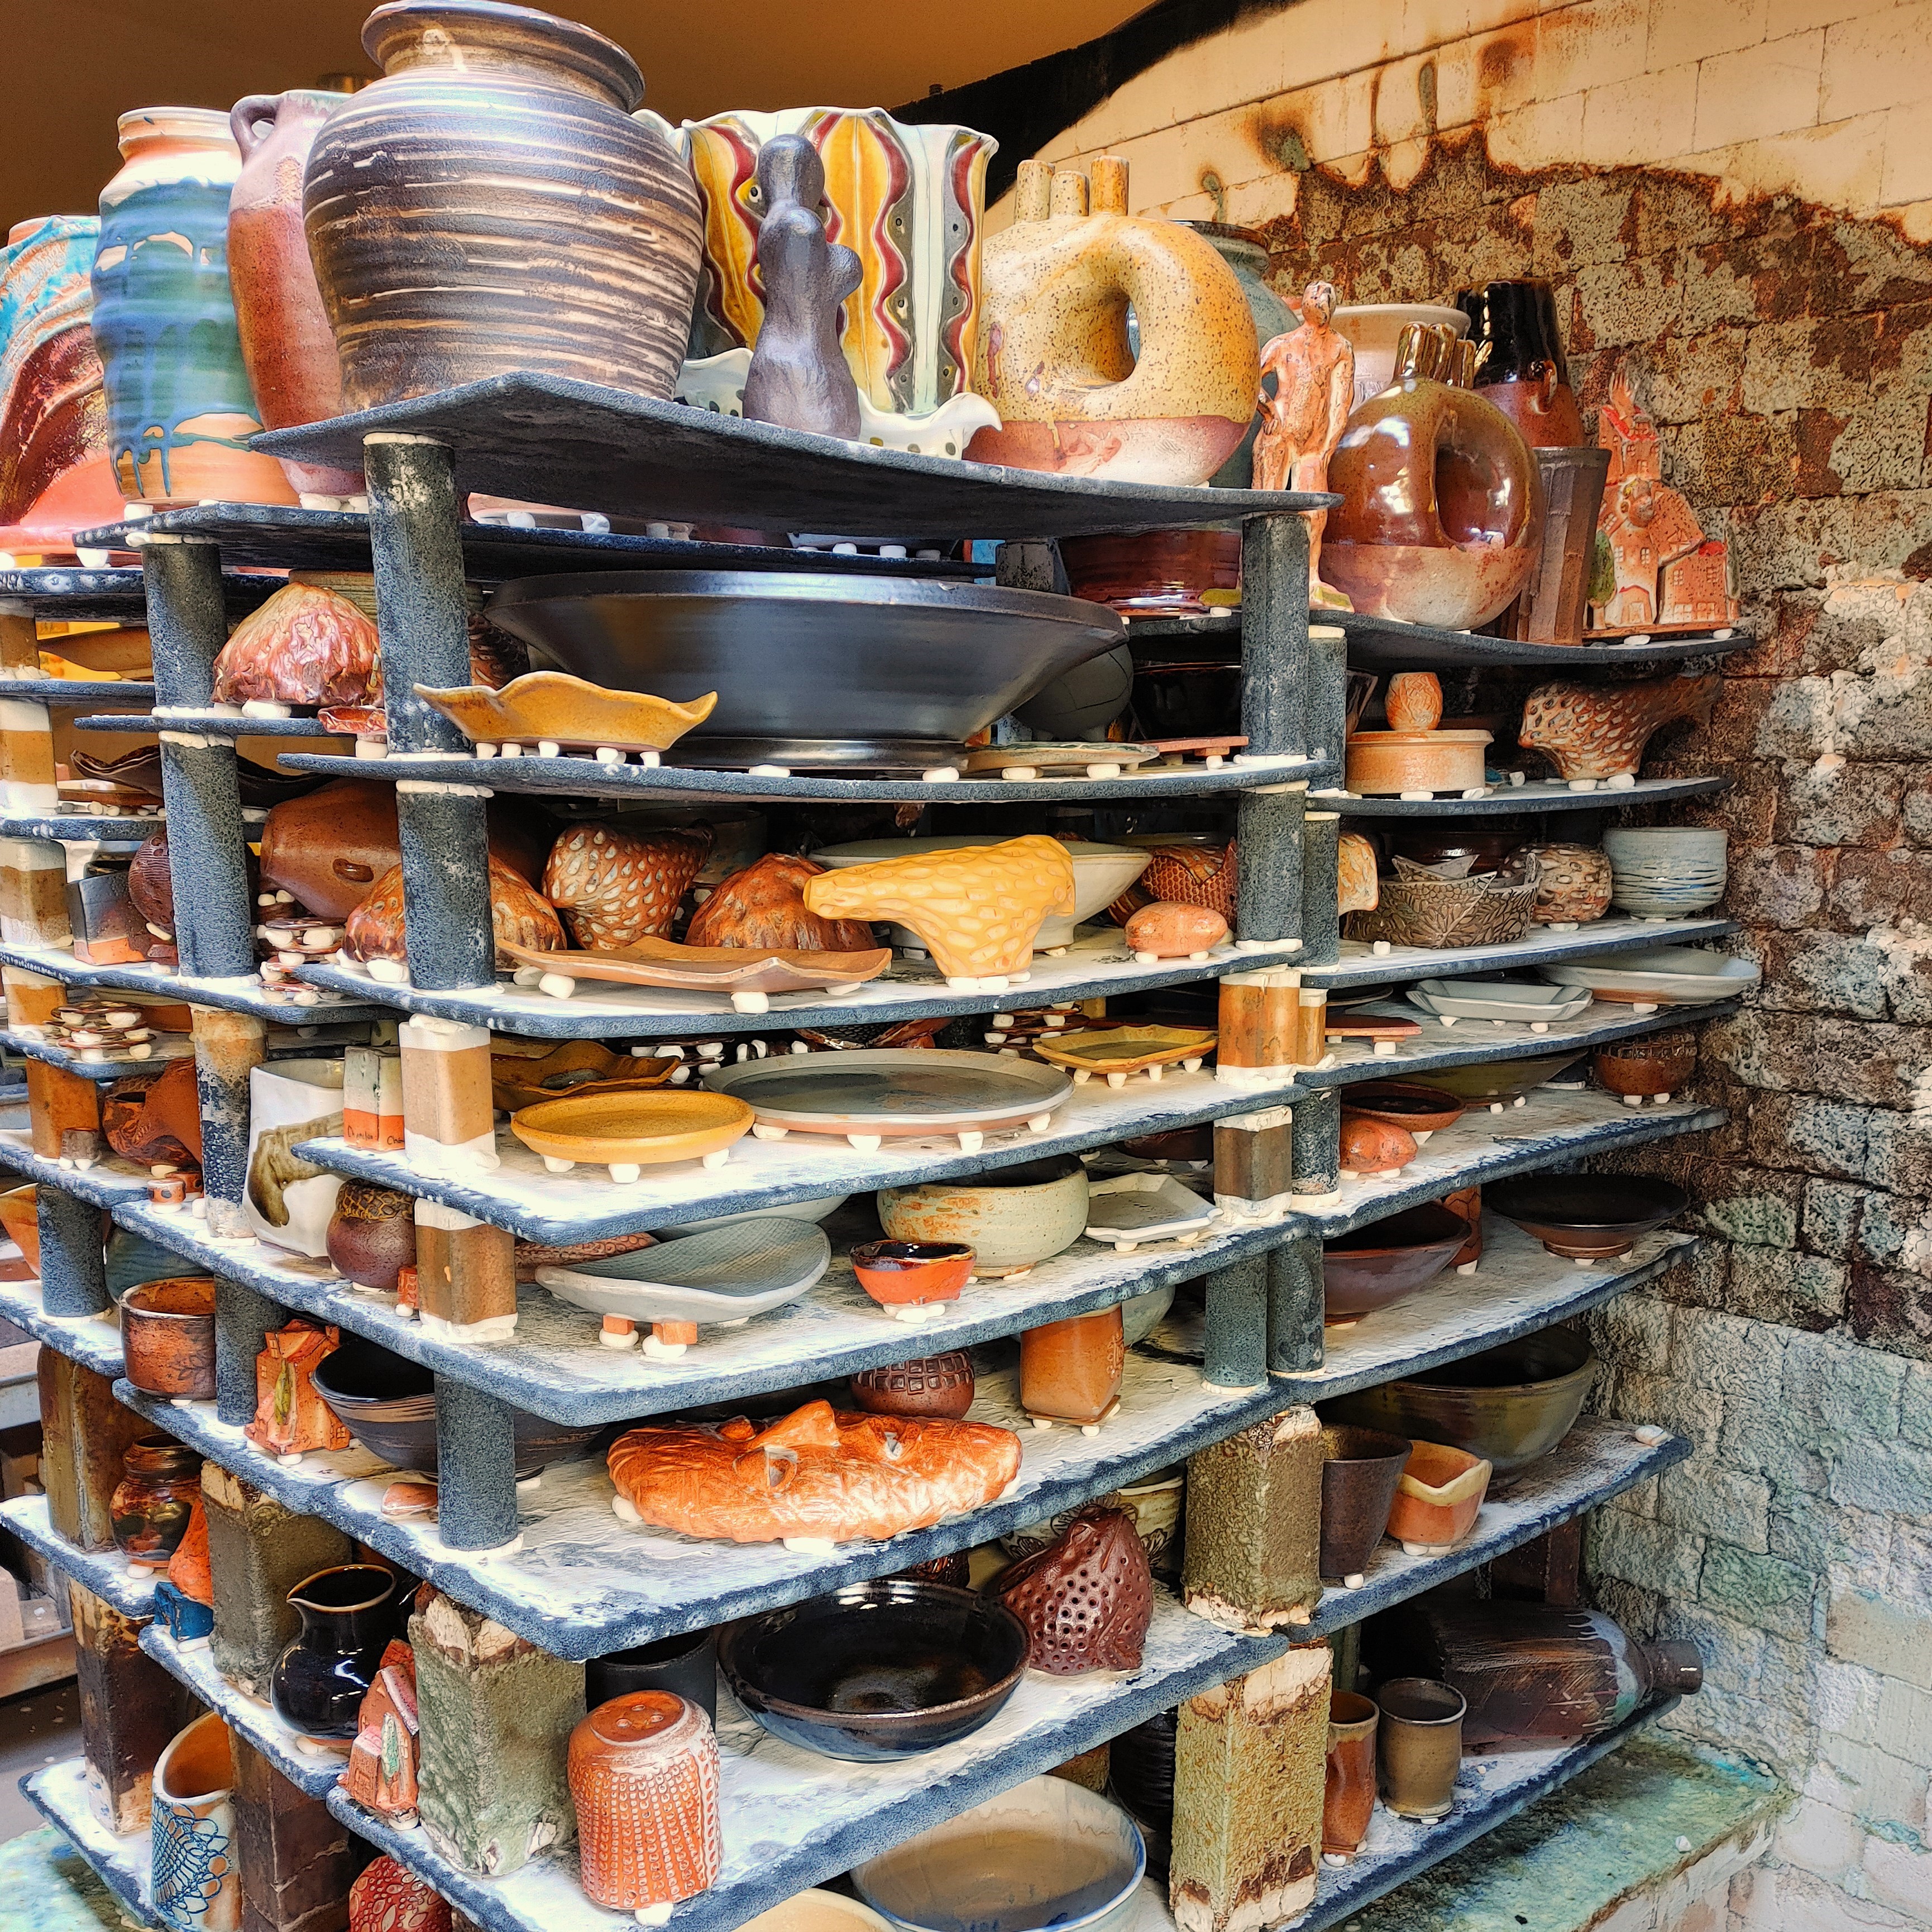 Range of Pottery Molds on a Wooden Shelf in Potters Studio. for